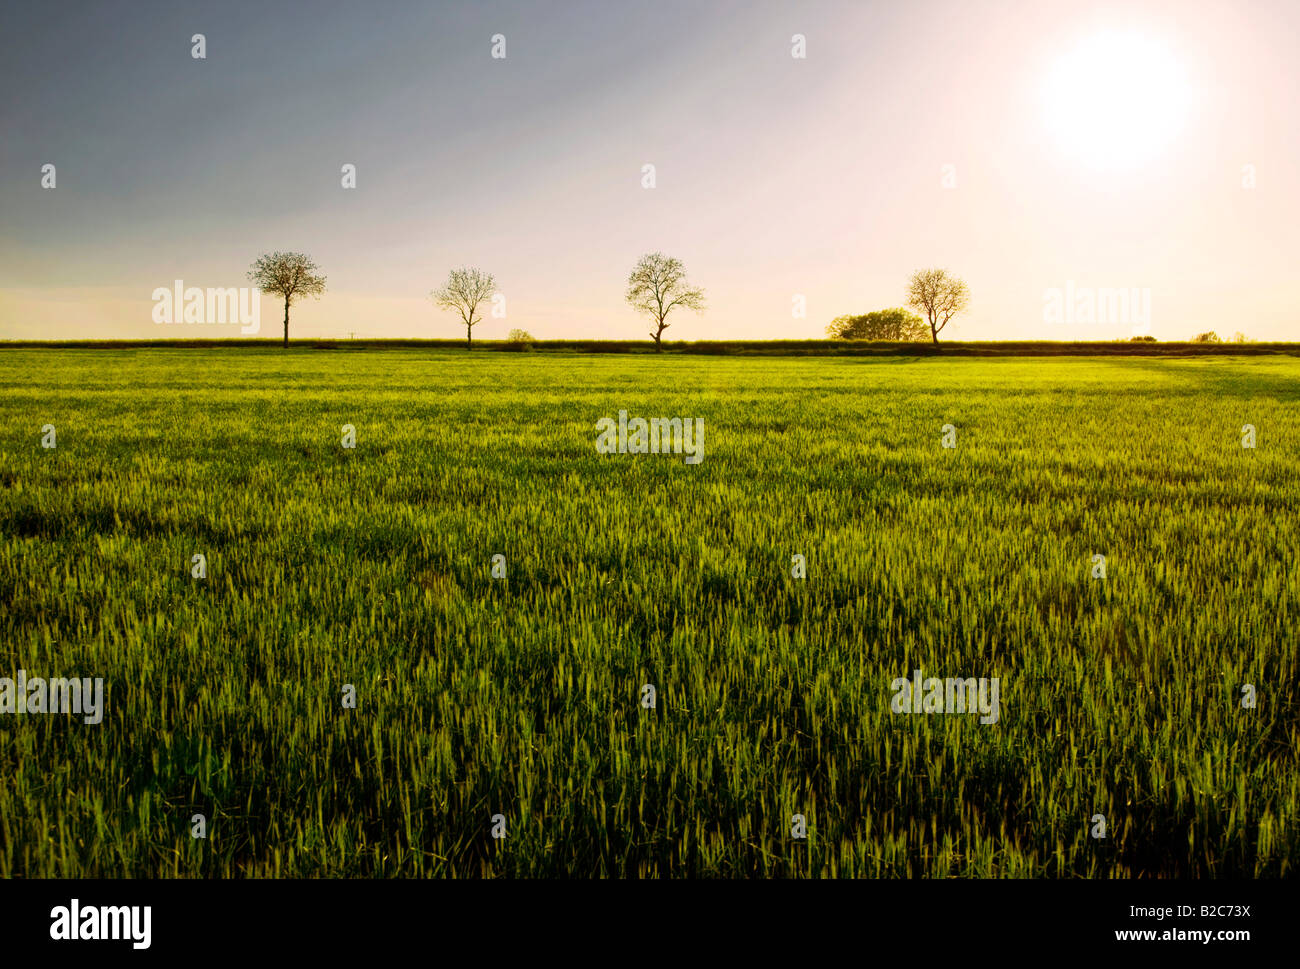 Barley field lit up by low sun with a row of trees on the horizon Stock Photo